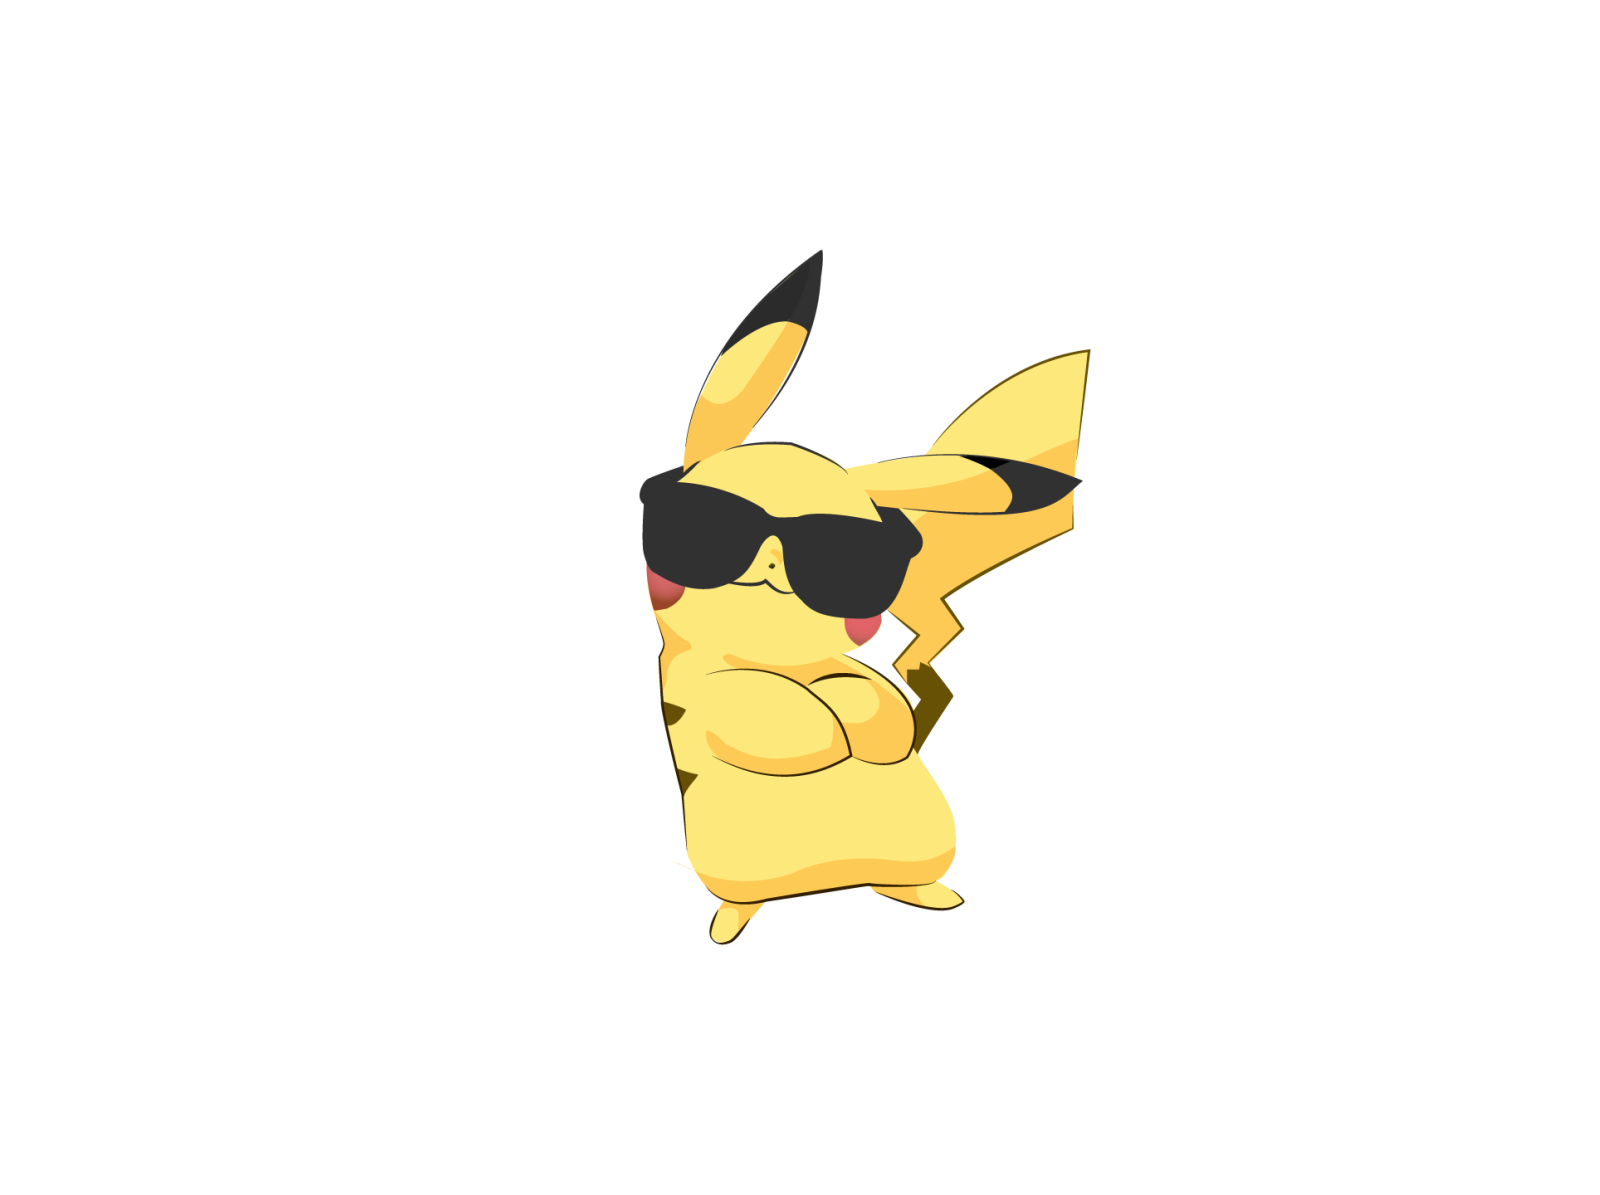 Pikachu with Shades by Tejeshwar Pradhan on Dribbble